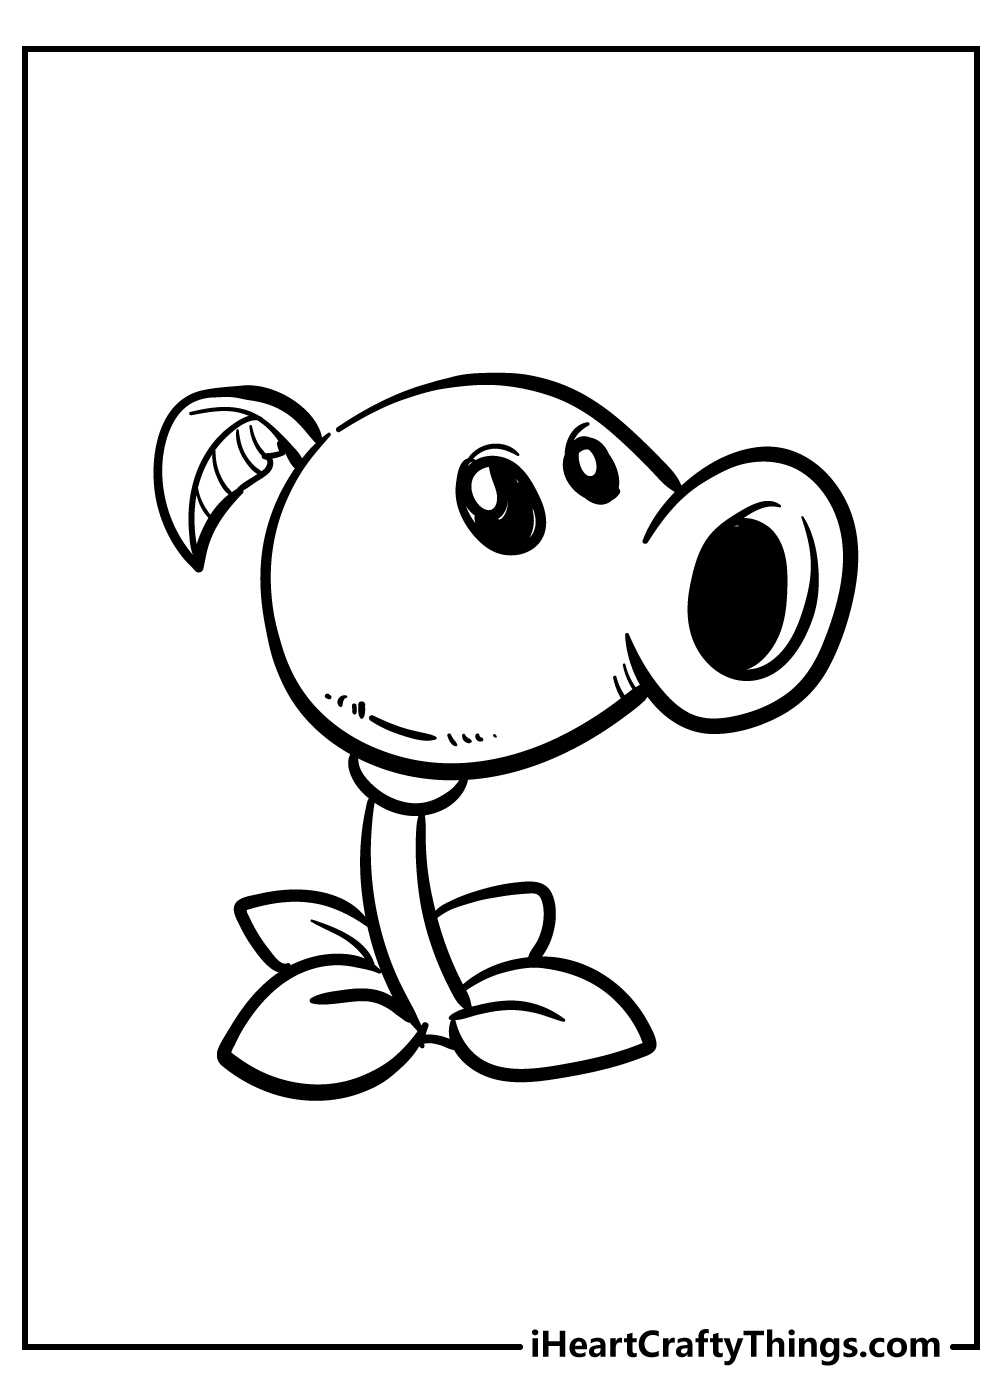 Plants Vs. Zombies Coloring Sheet for children free download